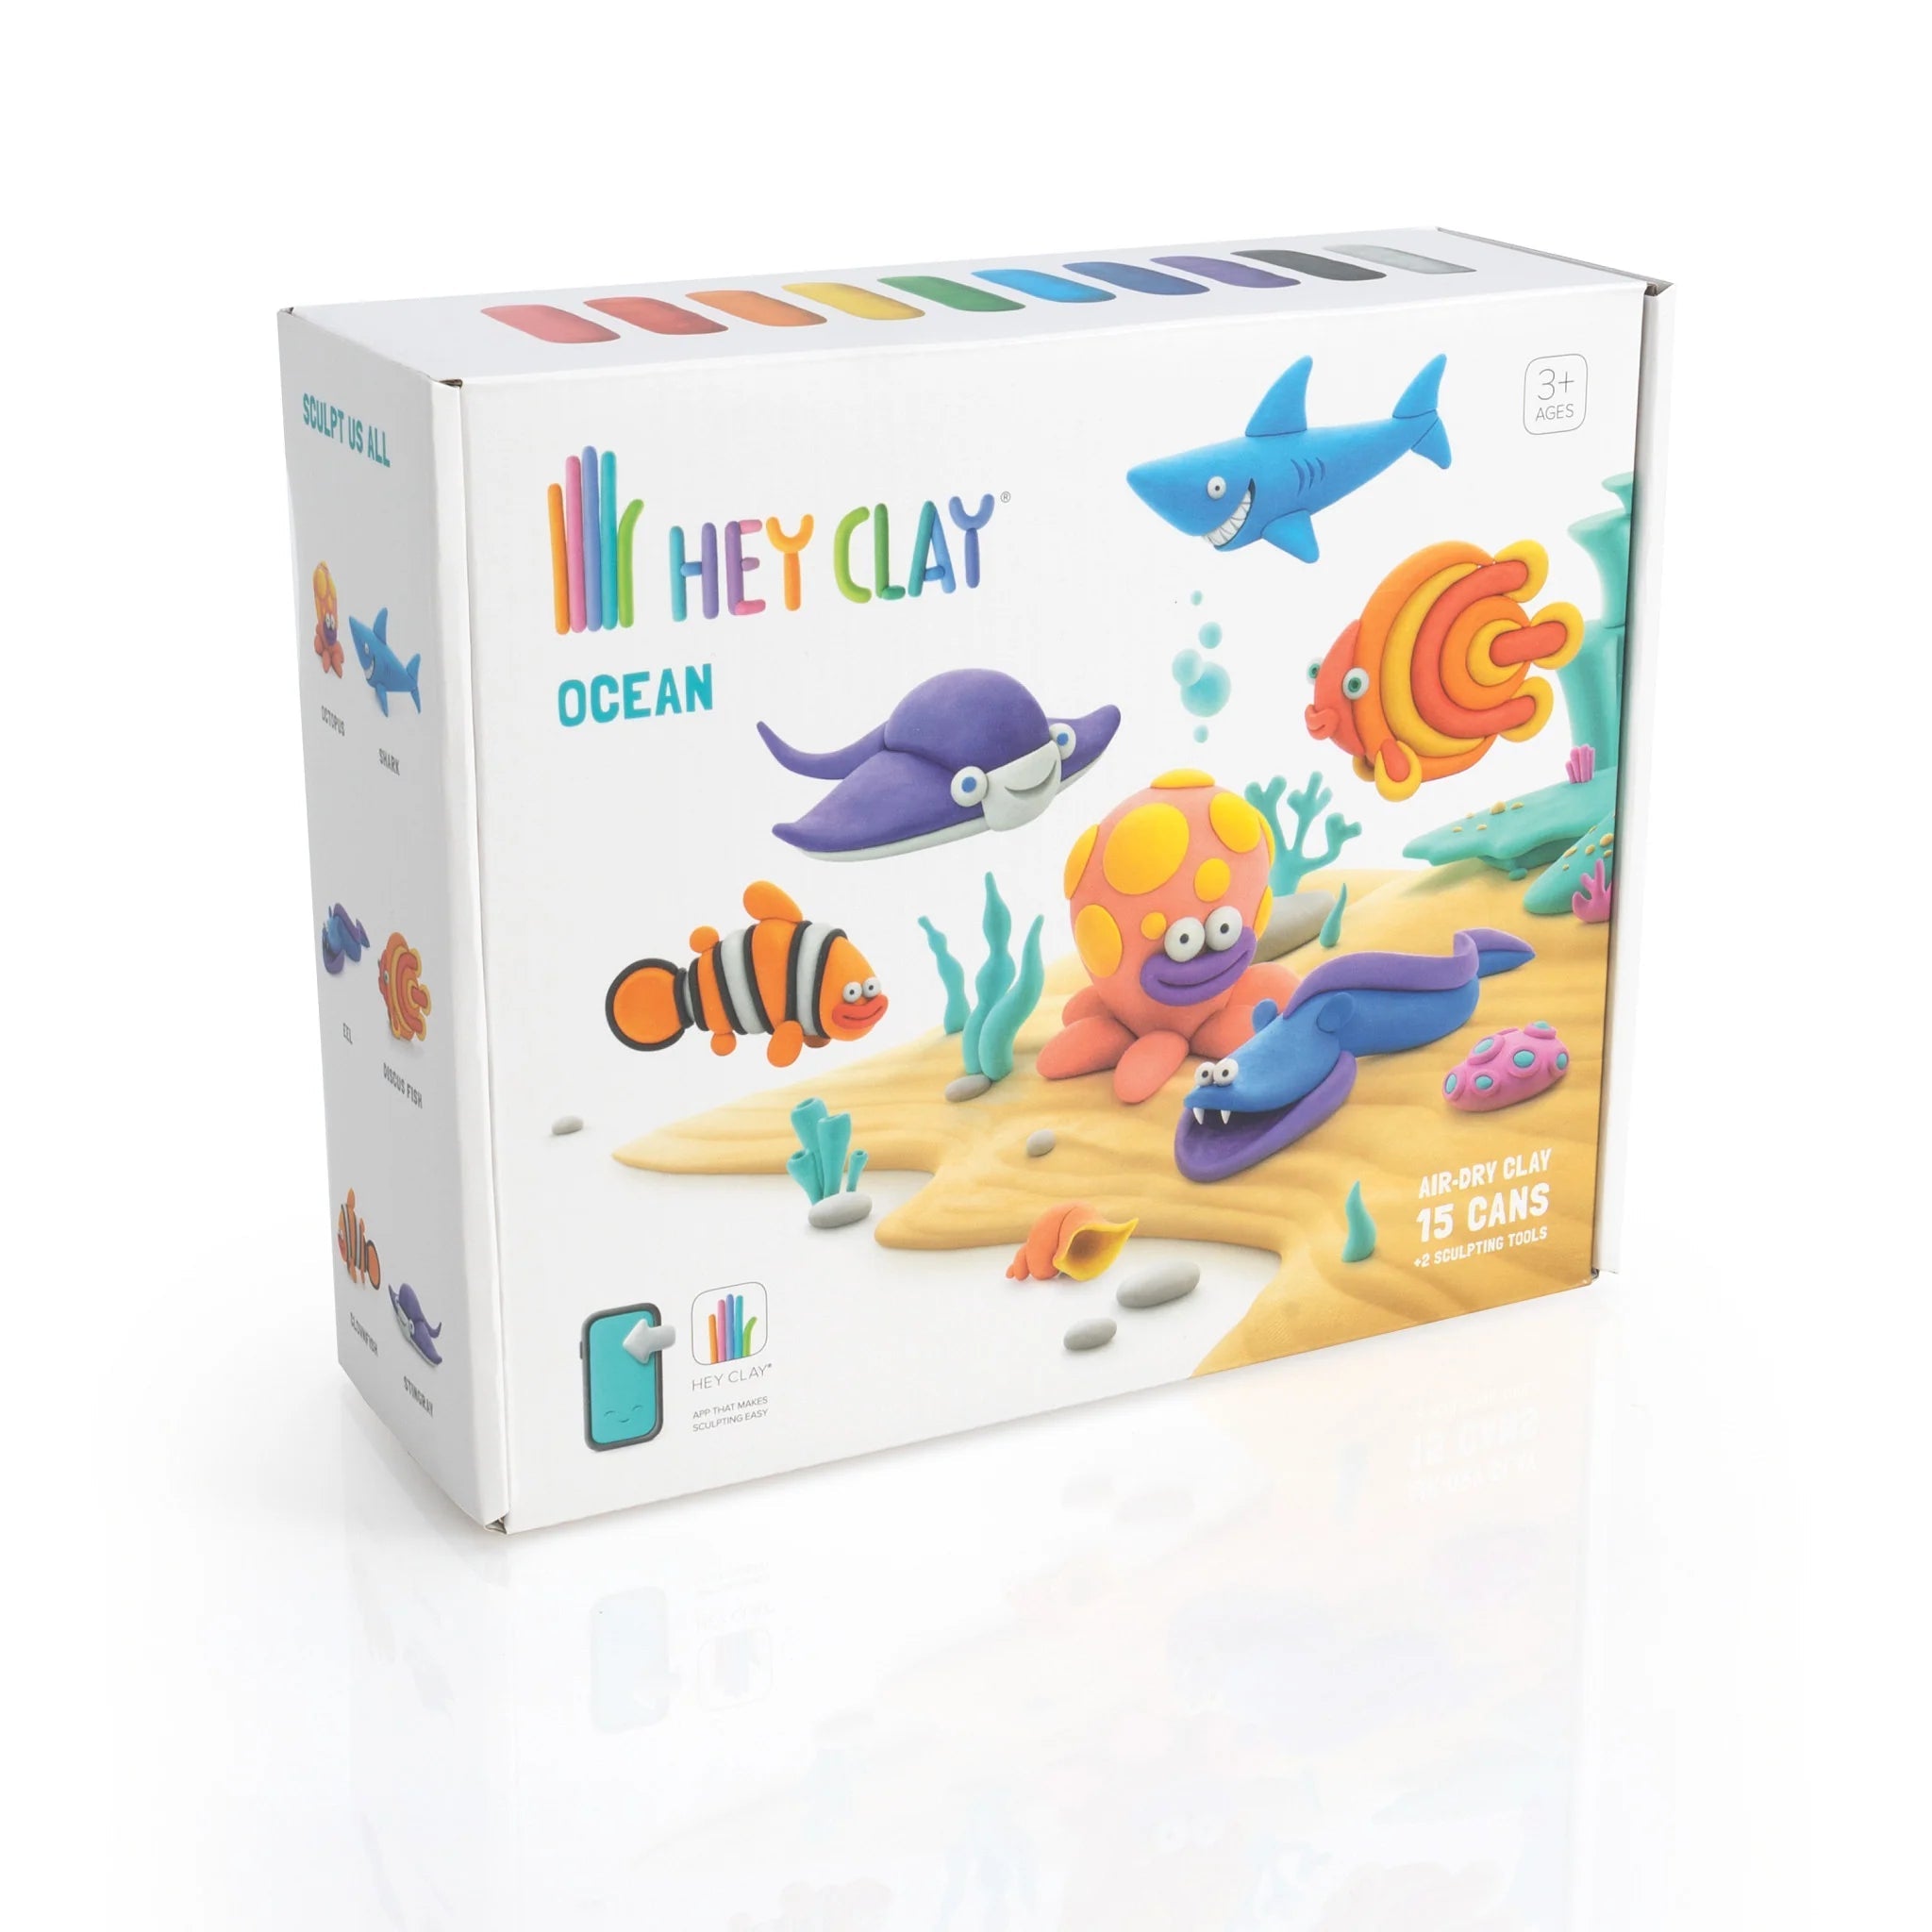 Hey Clay - Poop Oops Air-Dry Clay - Best for Ages 3 to 10